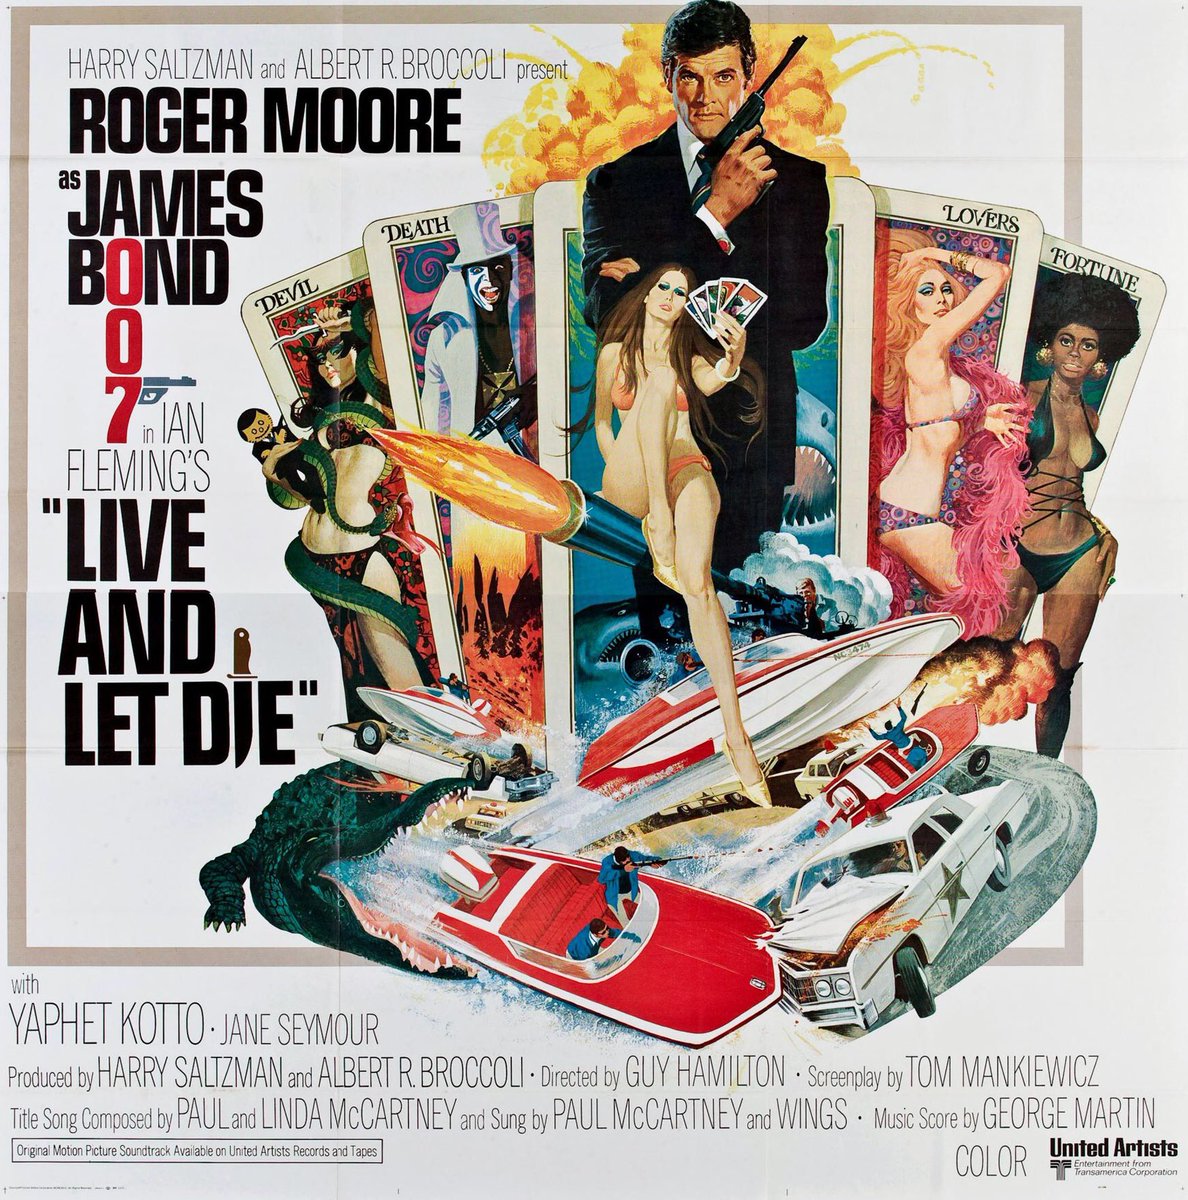 8pm TODAY on @ITV4

The 1973 #JamesBond film🎥 “Live and Let Die” directed by #GuyHamilton from a screenplay by #TomMankiewicz 

Based on #IanFleming’s 1954 novel📖

🌟#RogerMoore #YaphetKotto #JaneSeymour
#CliftonJames #JuliusWHarris #GeoffreyHolder #DavidHedison #BernardLee